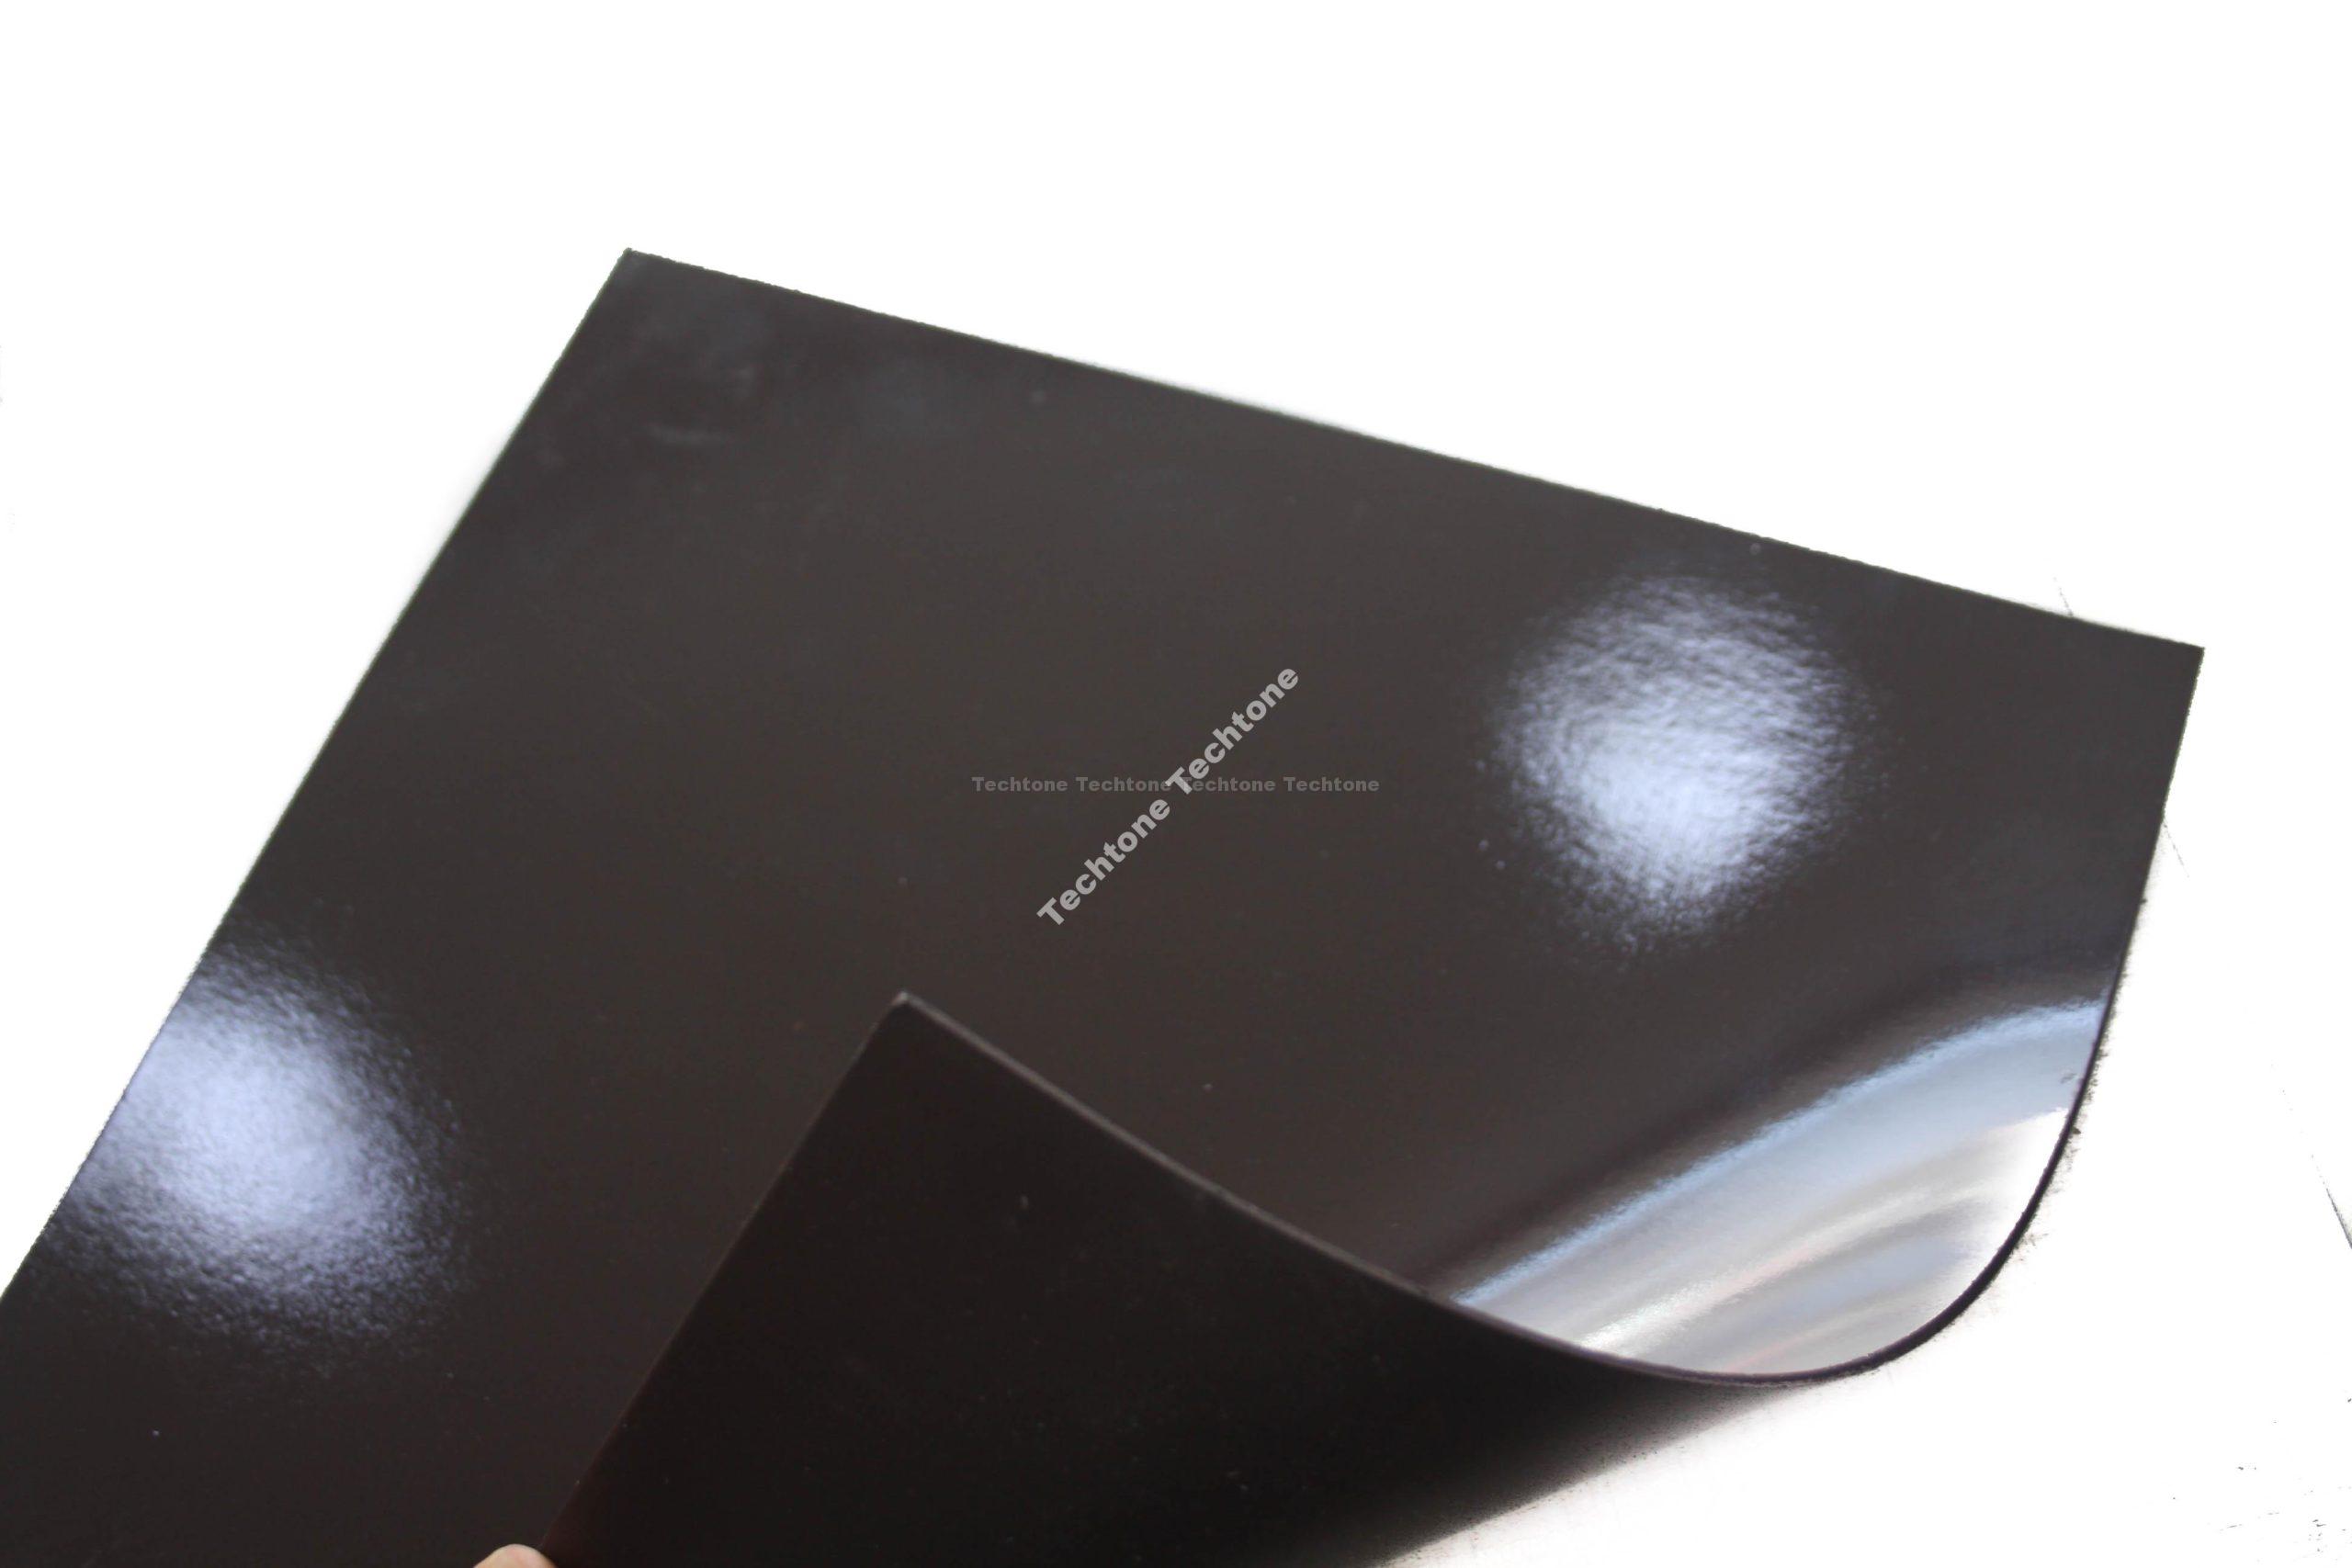 Non-adhesive Flexible Magnetic Sheet 30cmx30cm, 2mm thick - Magnets Online